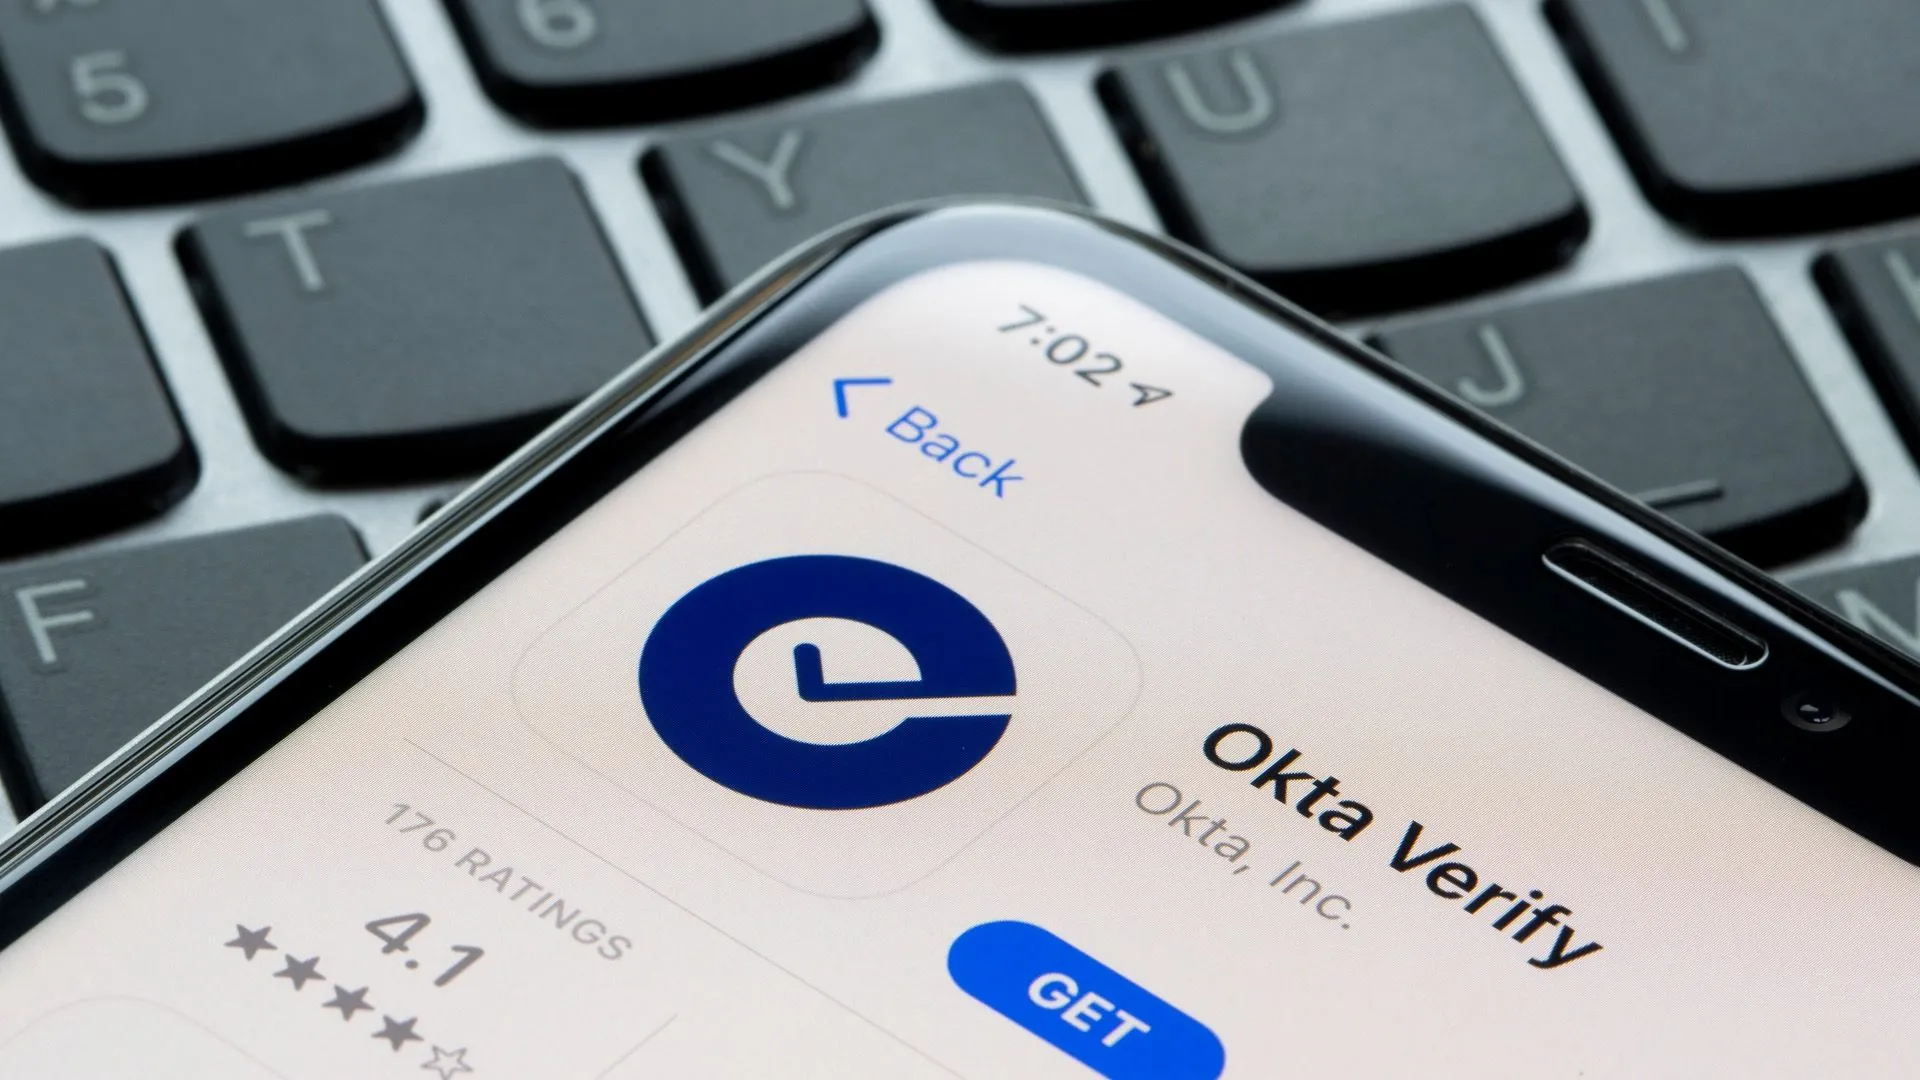 Okta Breach Highlight The Challenges of Incident Response Communications